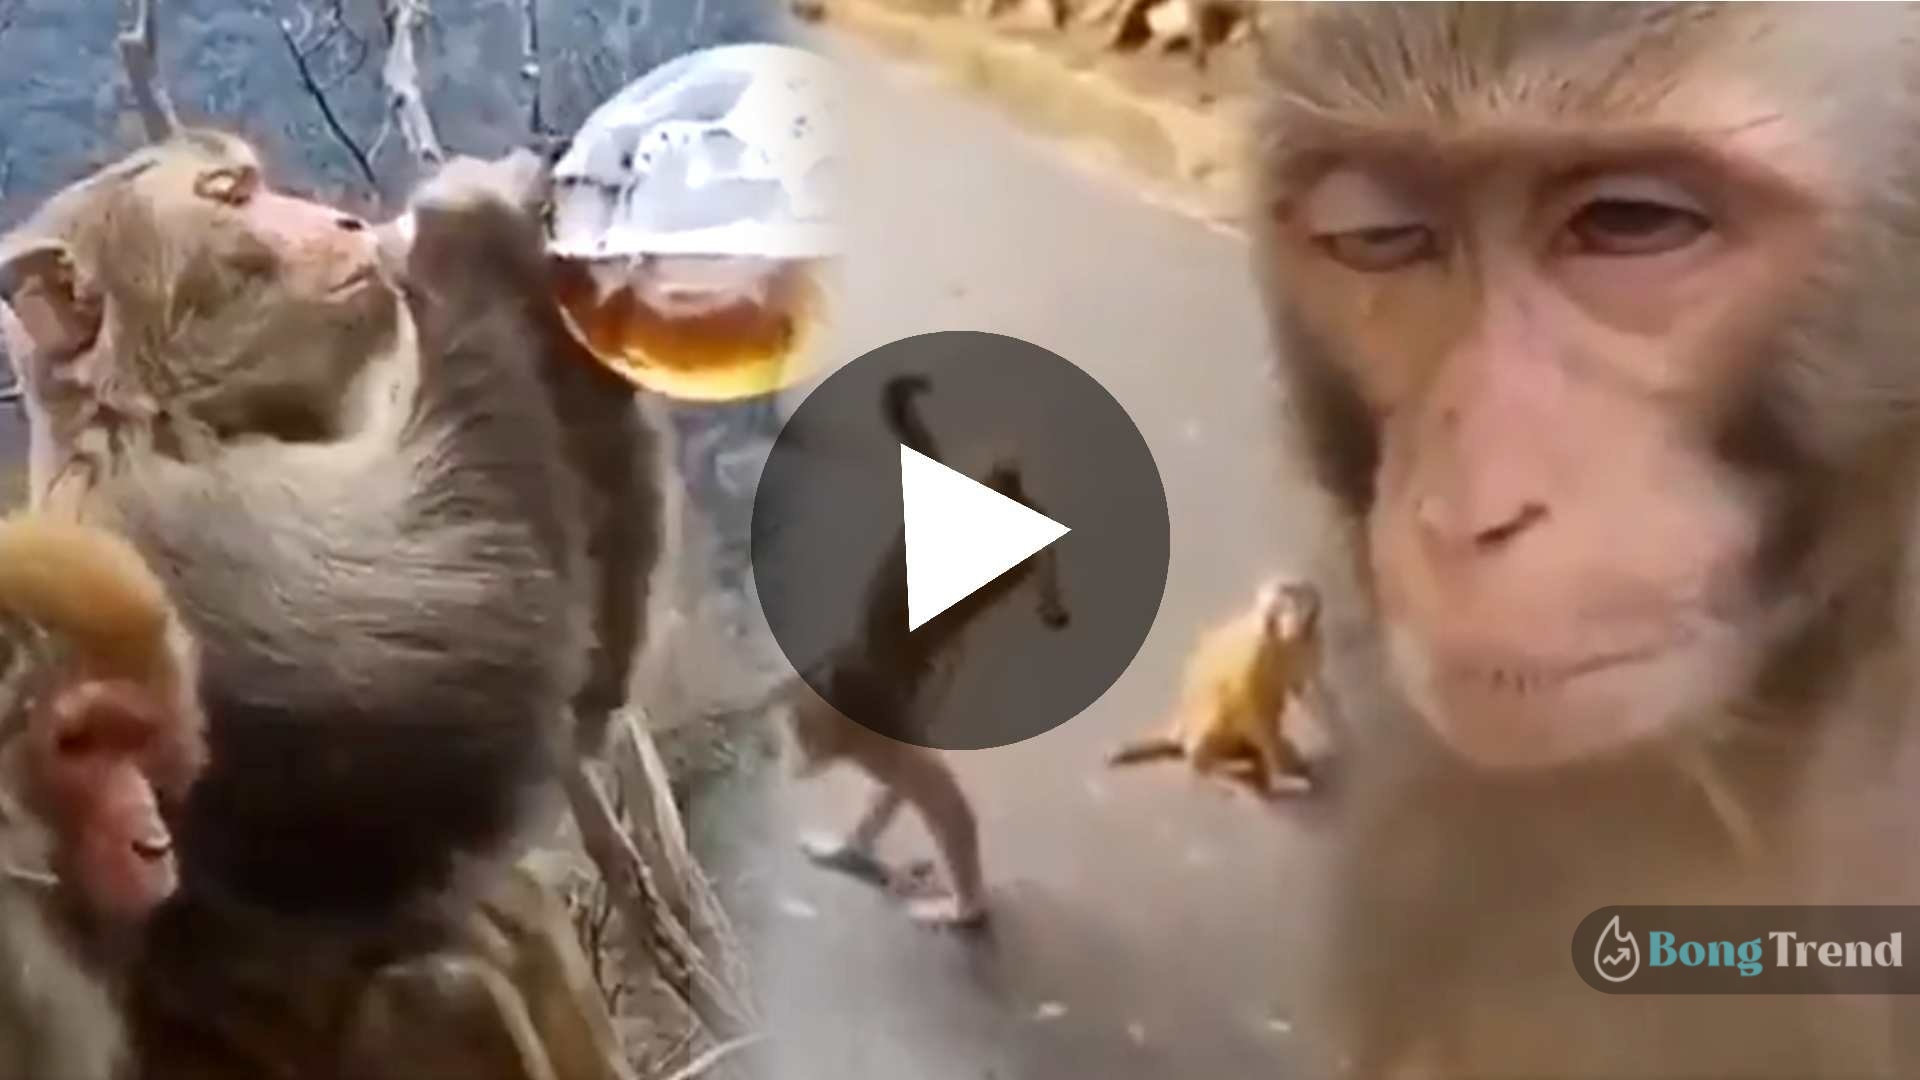 monkey drinks alcohol gets high viral video